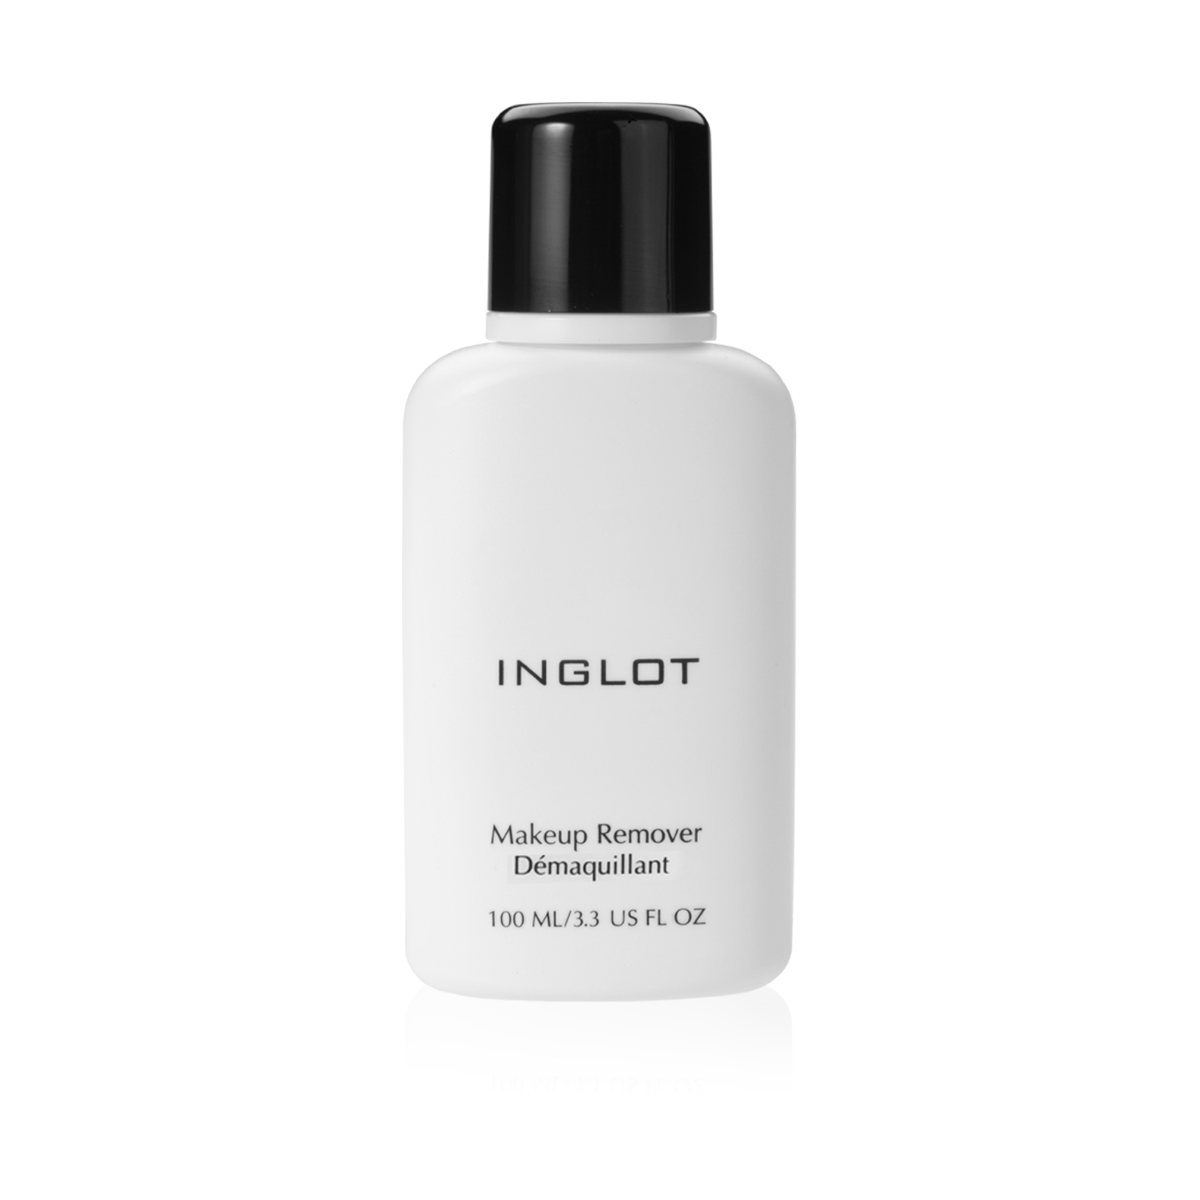 Makeup Remover (100 ml)